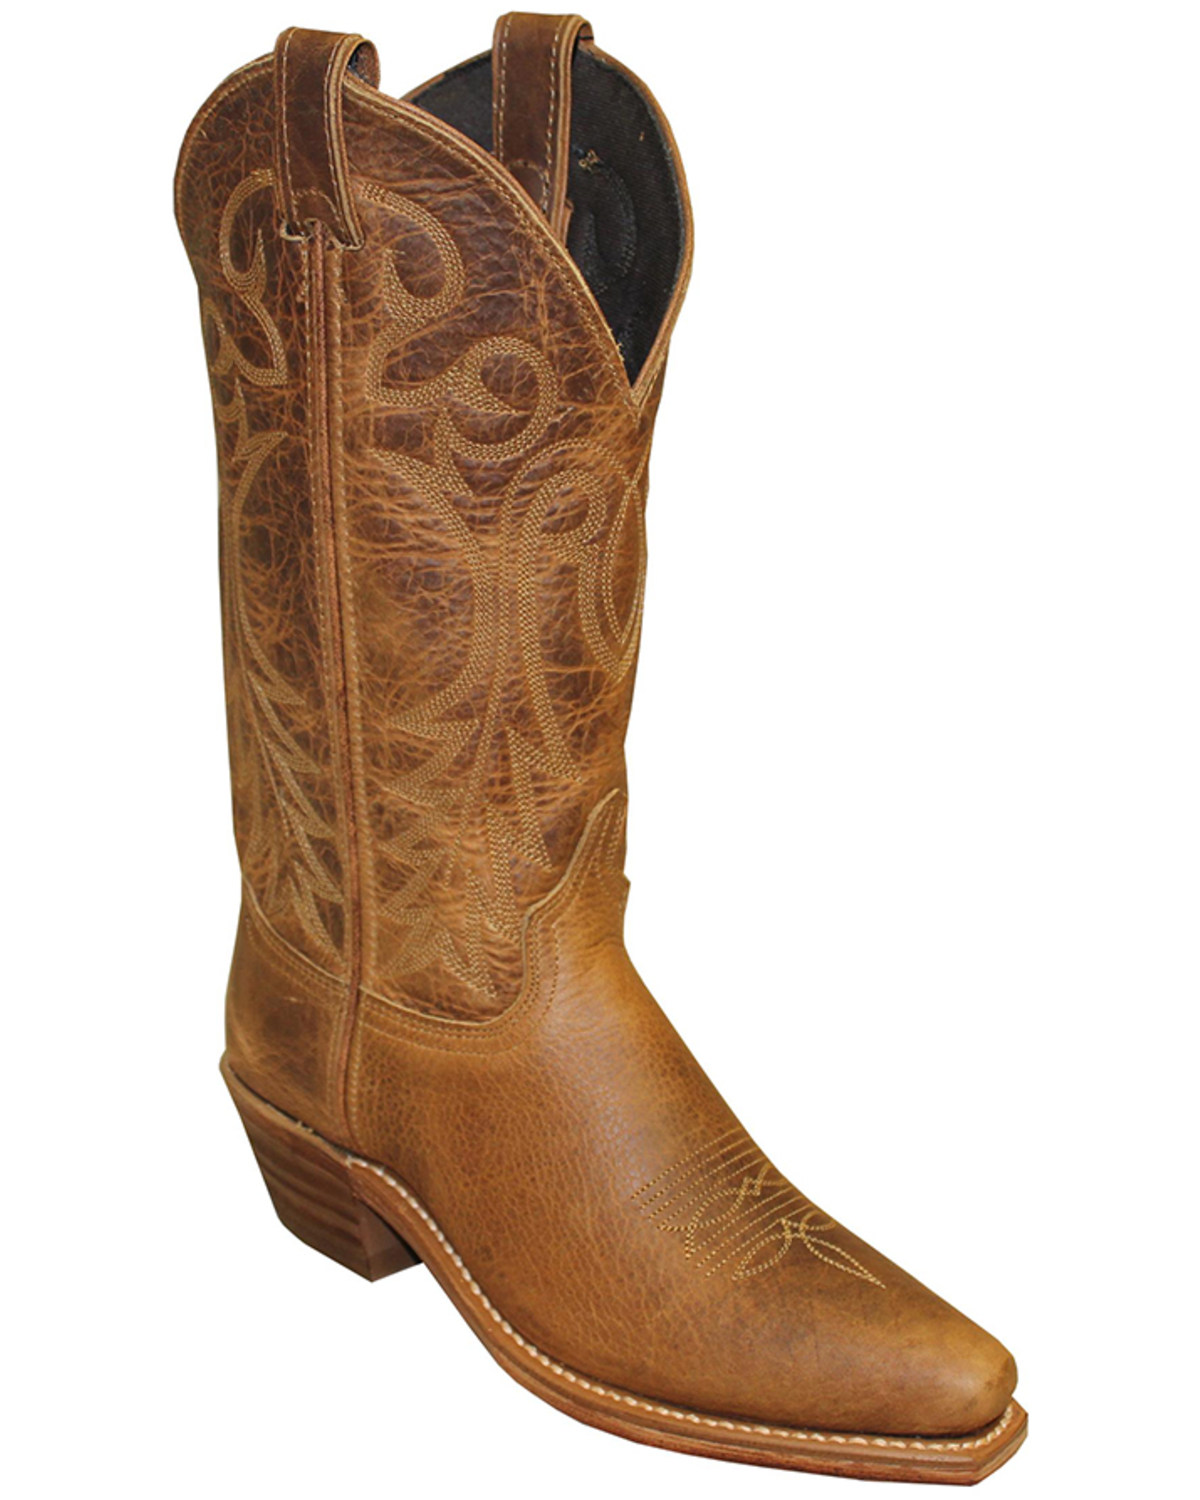 Abilene Women's Bison Traditional Performance Western Boots - Snip Toe